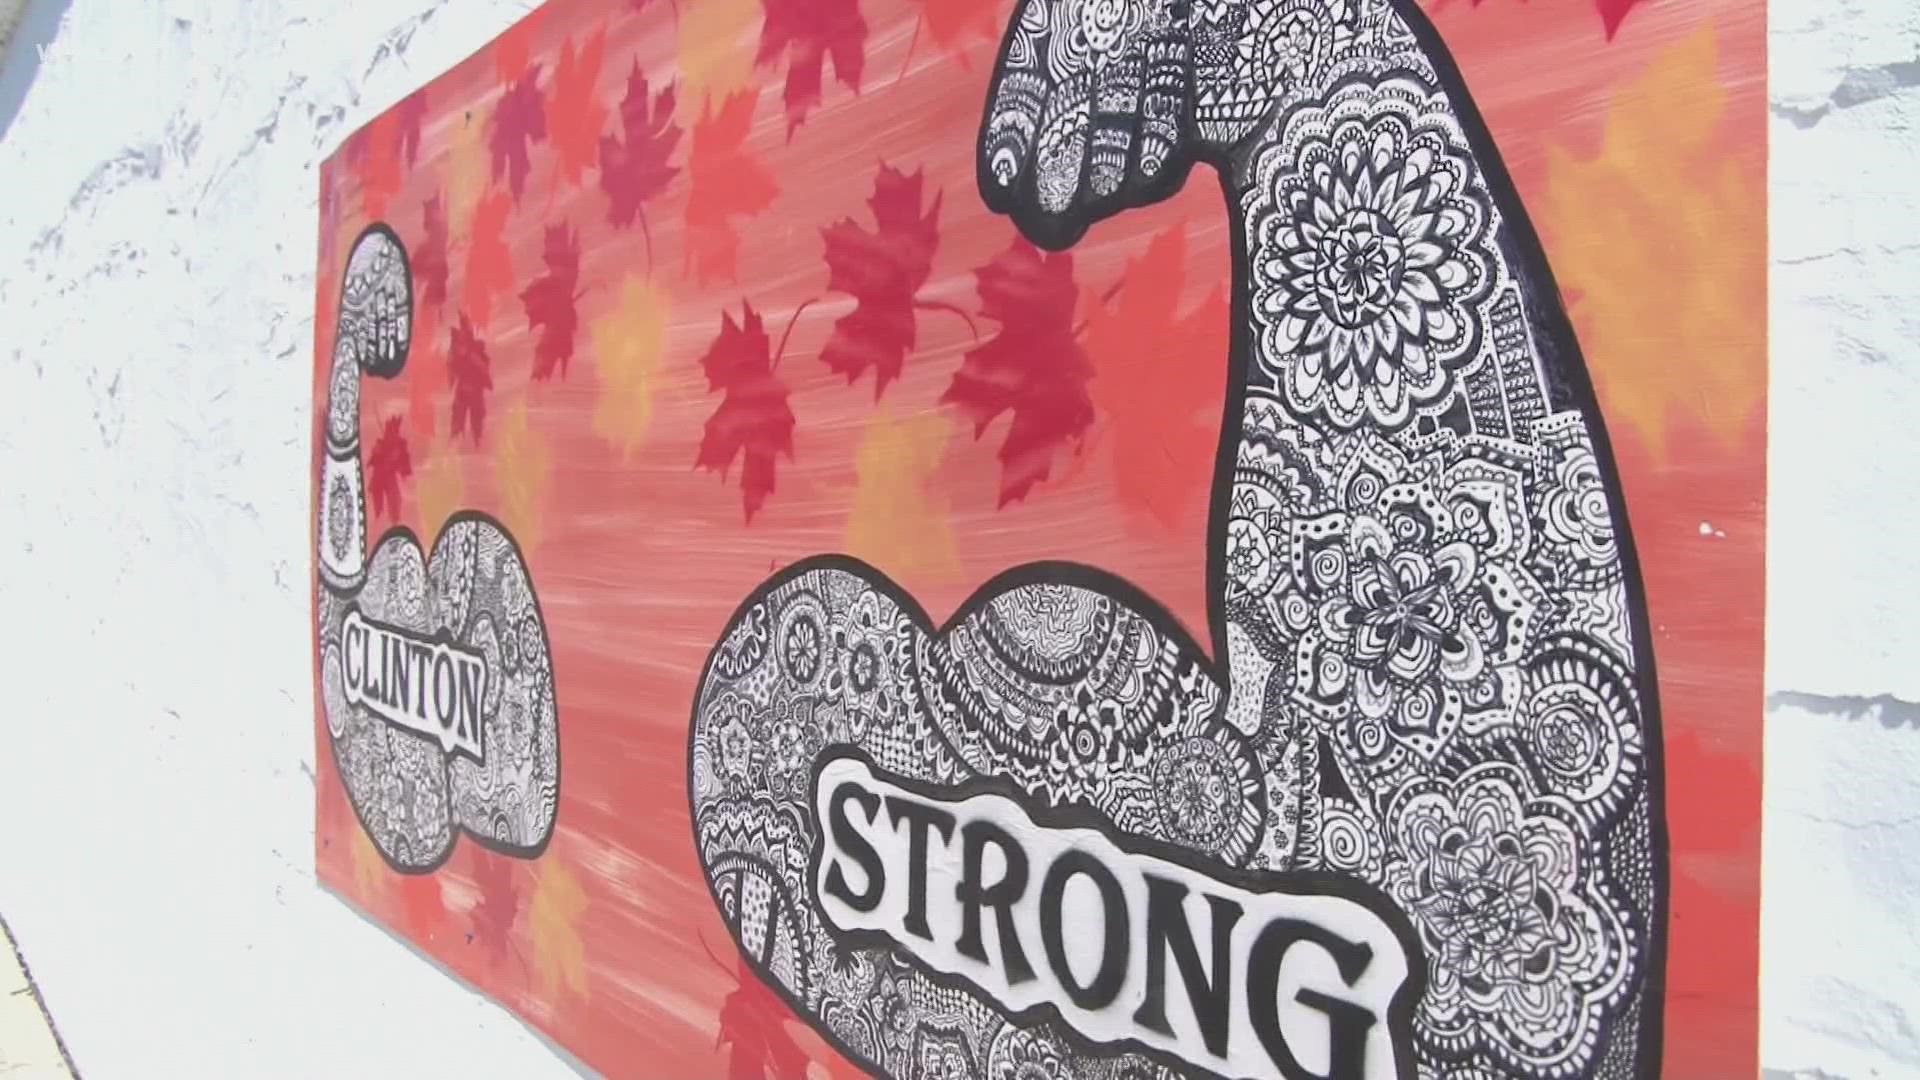 If you head to downtown Clinton, you might notice a new pop of art.